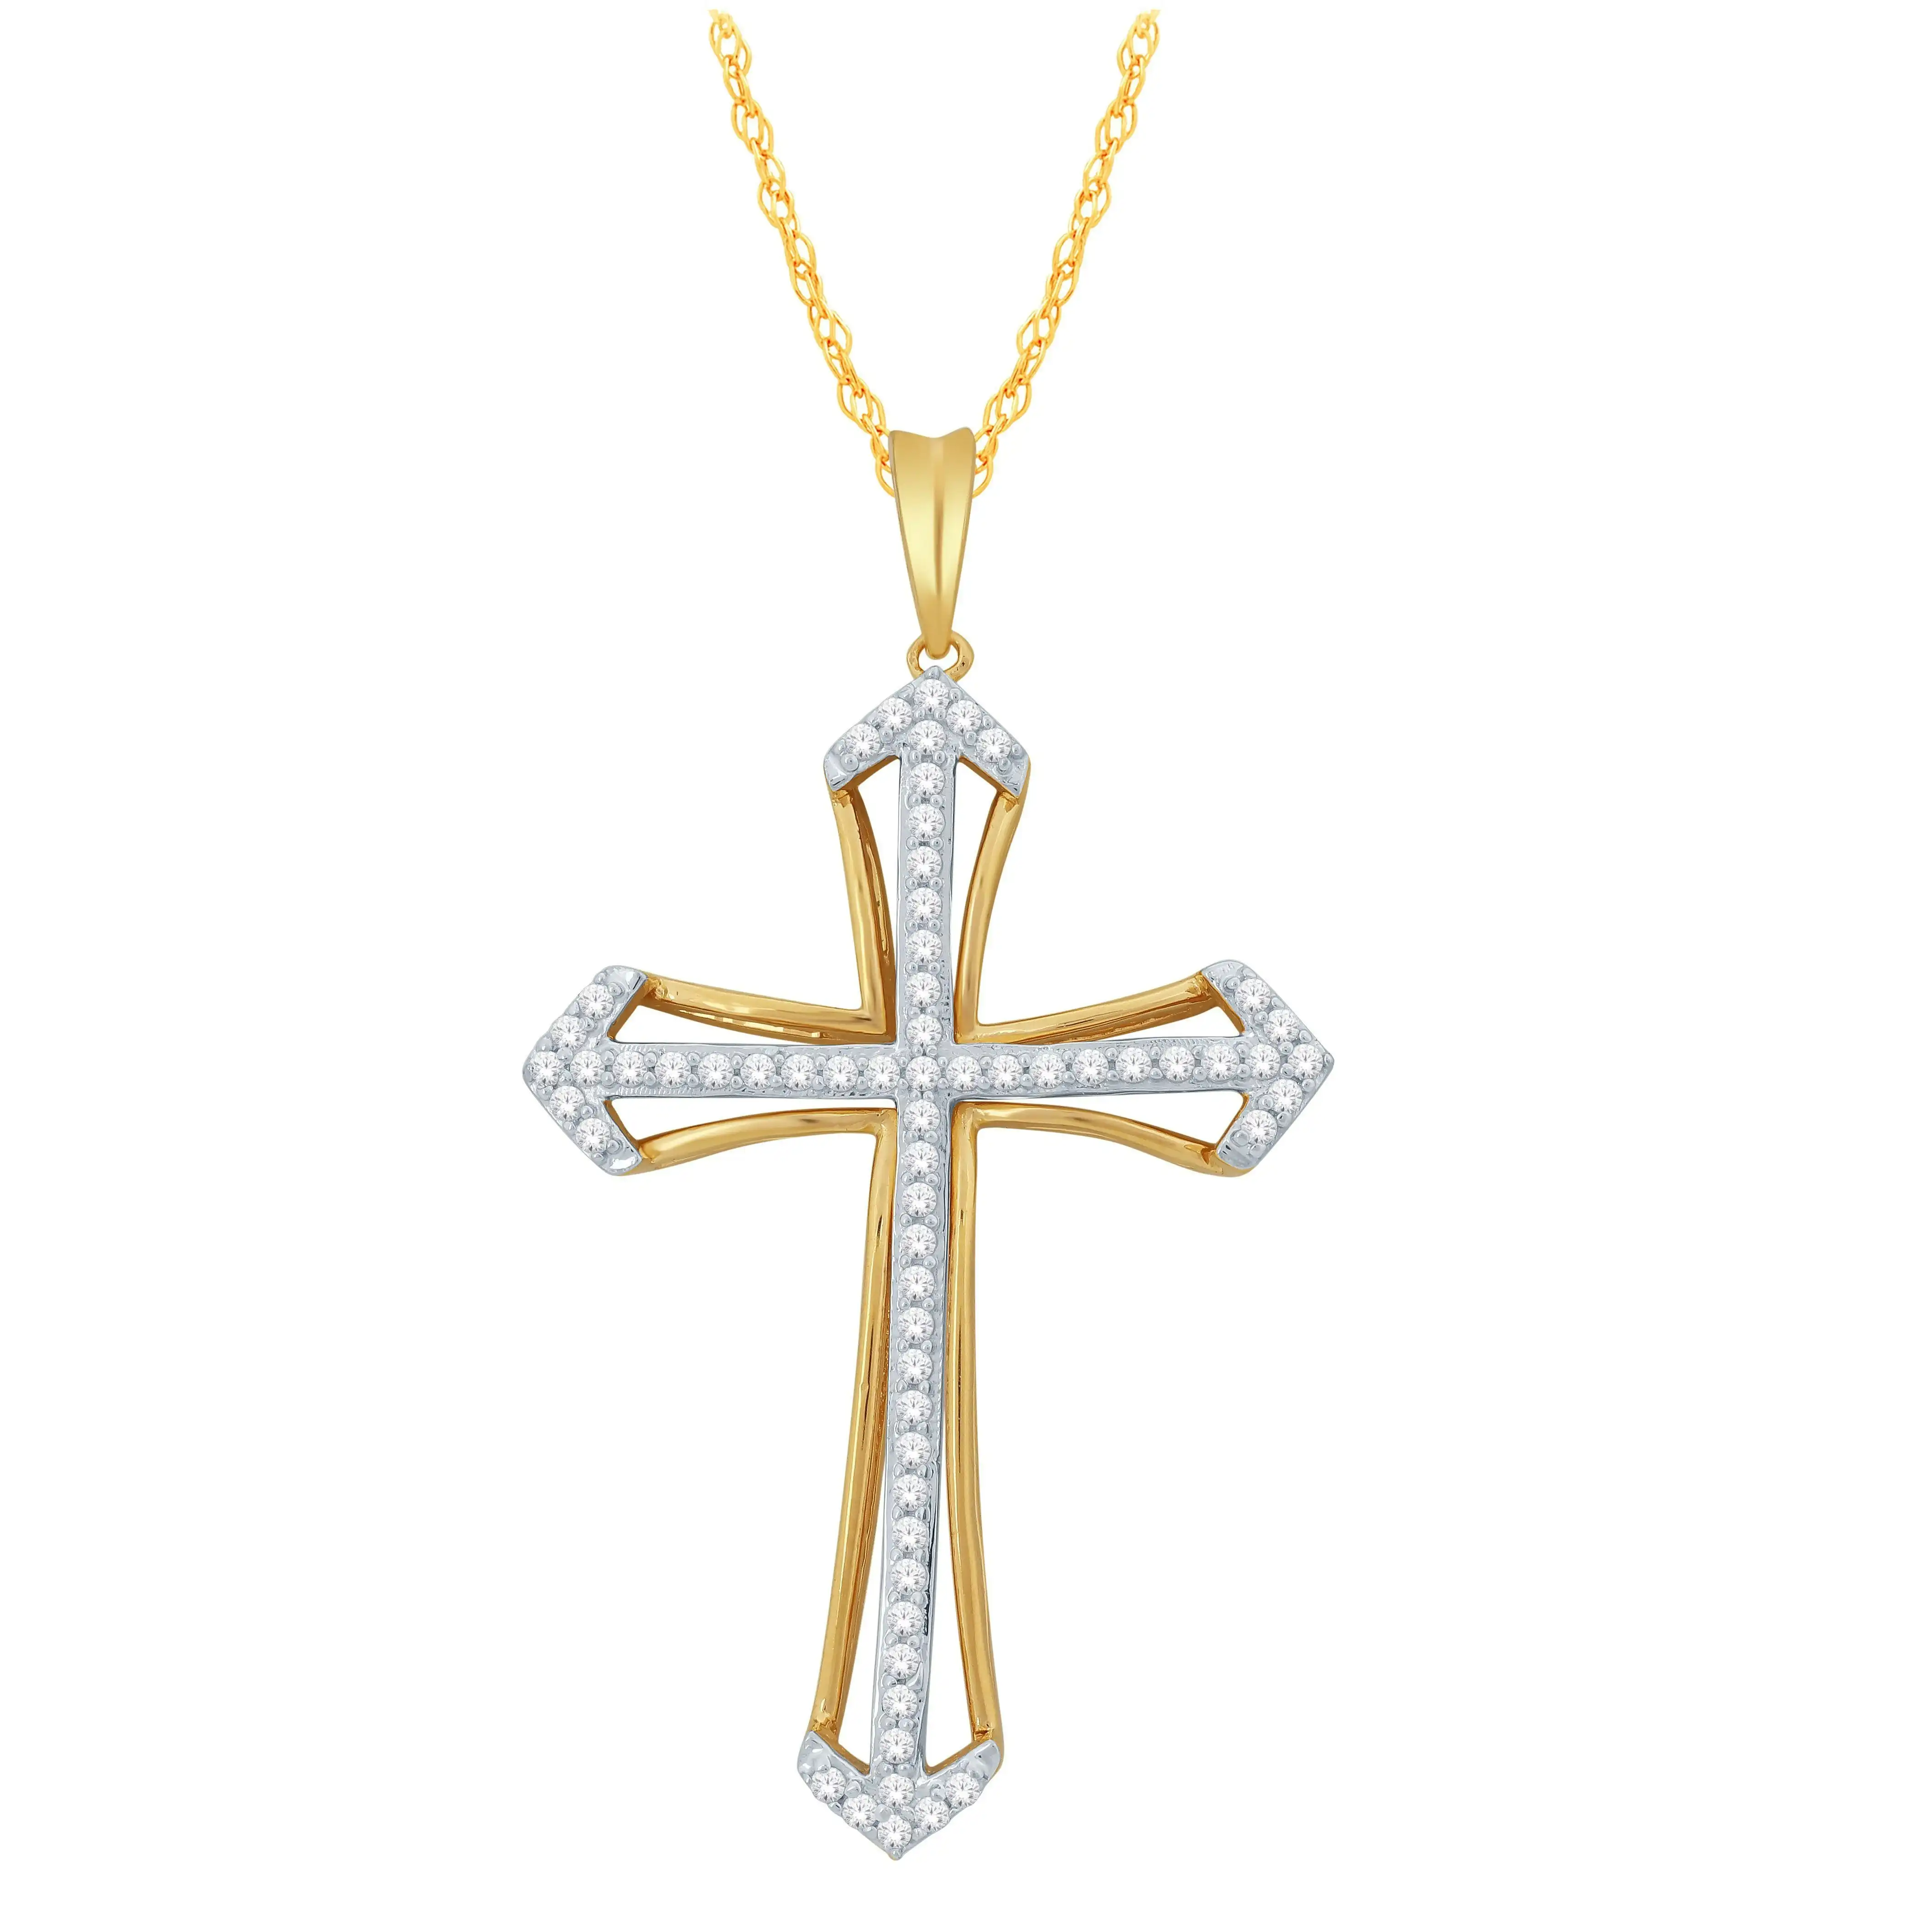 Brilliant Claw and Fancy Cross Necklace with 1/2ct of Diamonds in 9ct Yellow Gold